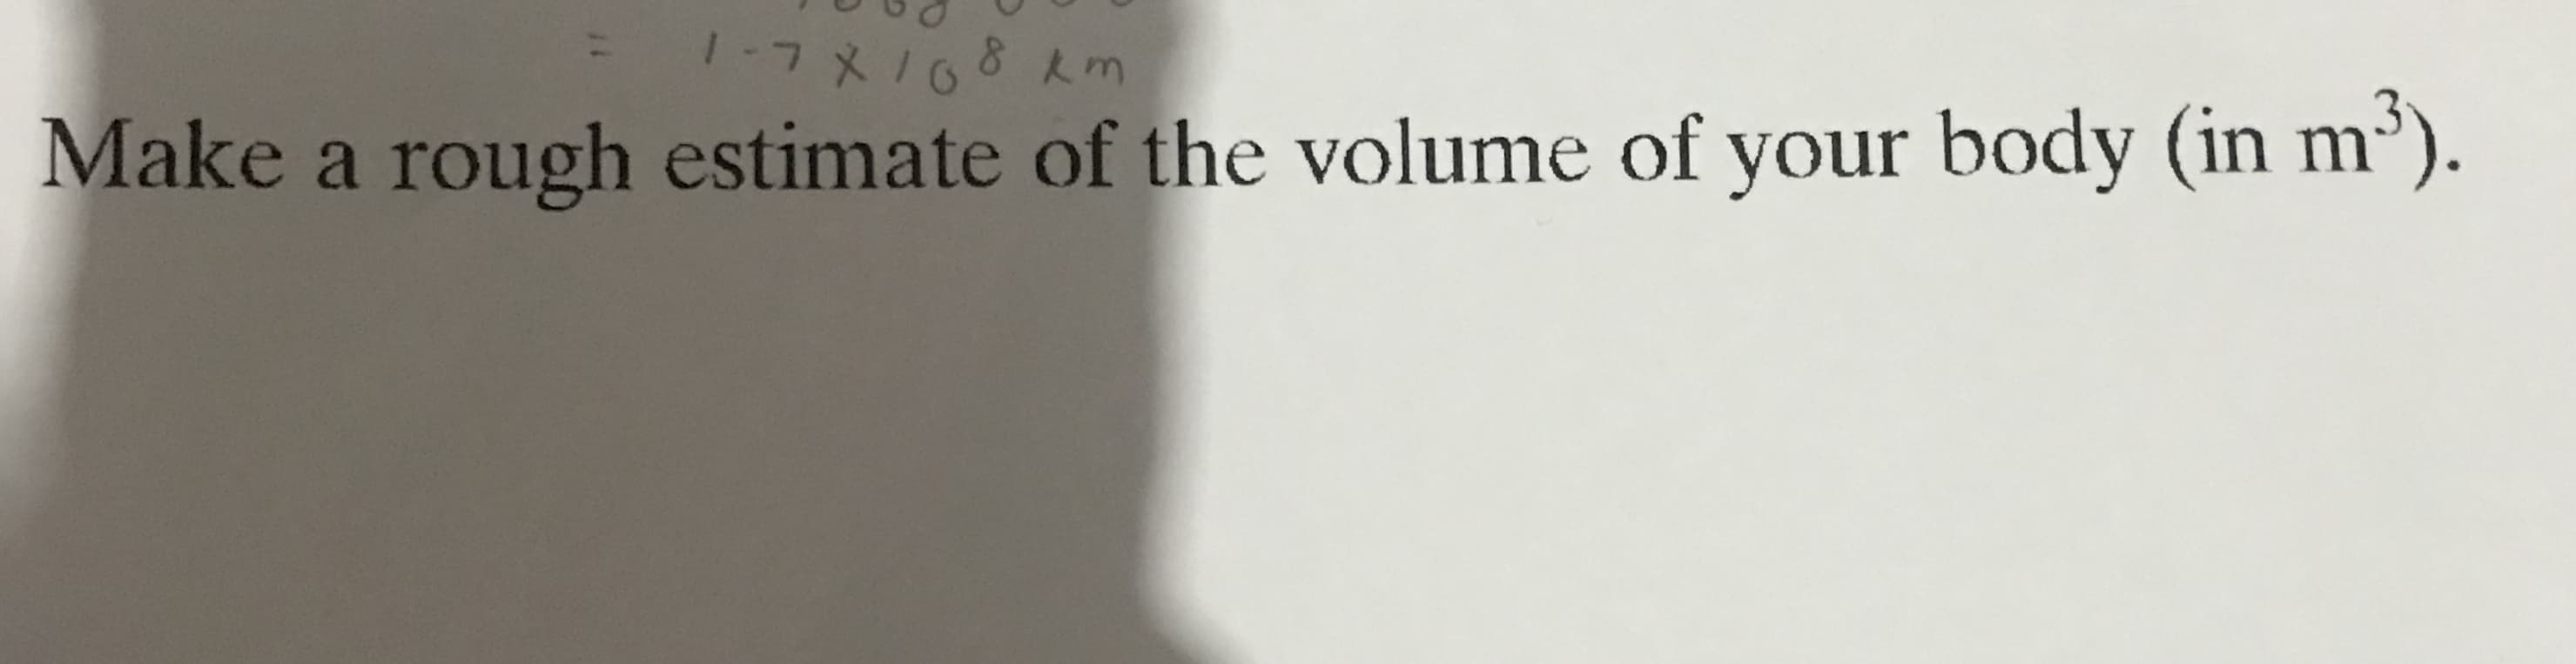 Make a rough estimate of the volume of your body (in m').
